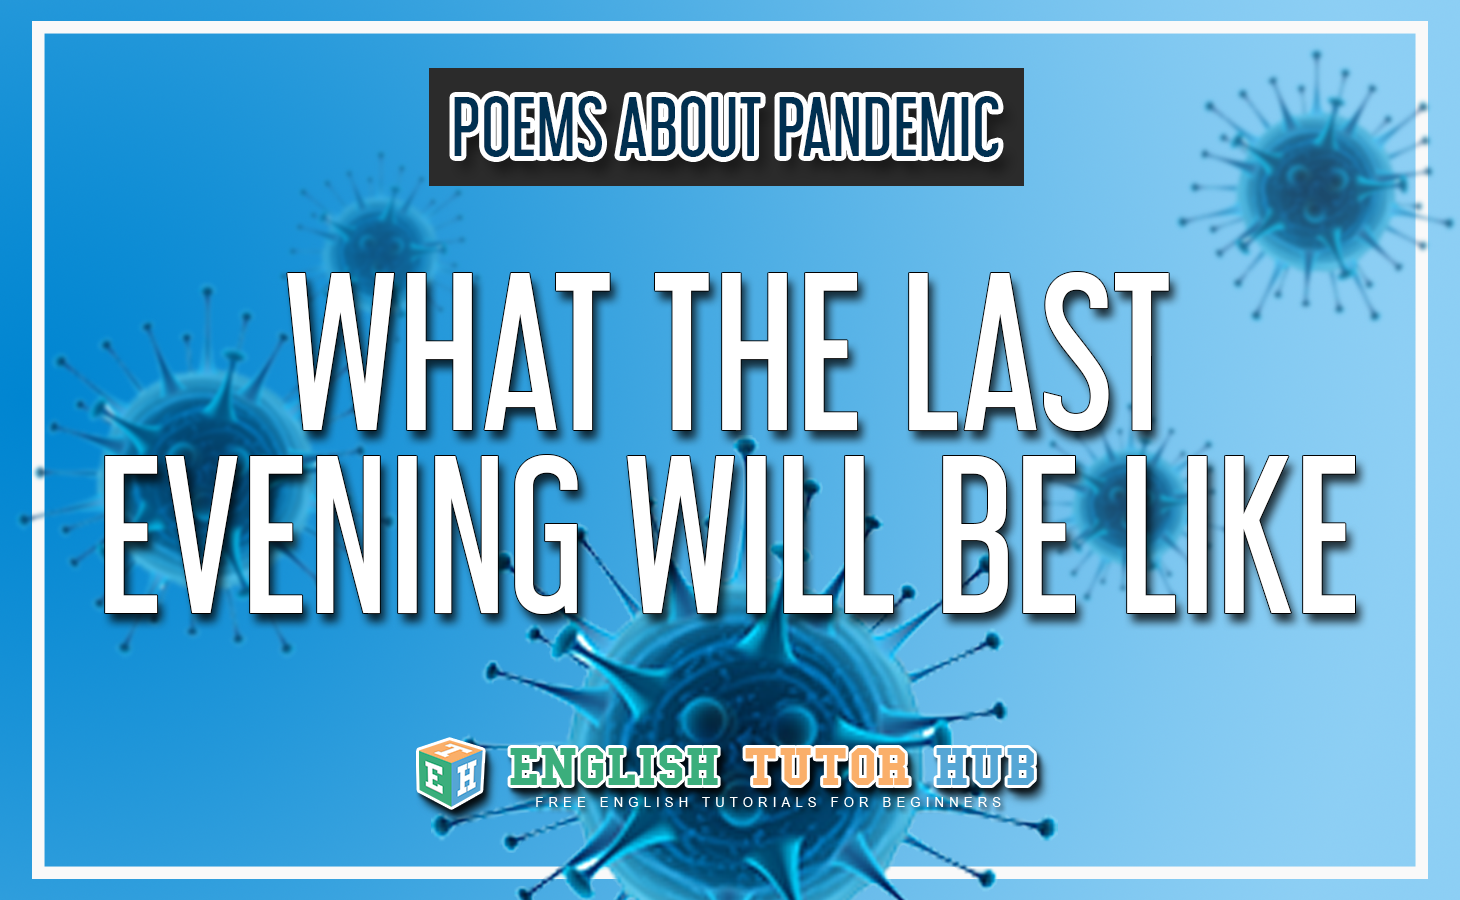 Poems About Pandemic - What the Last evening be like